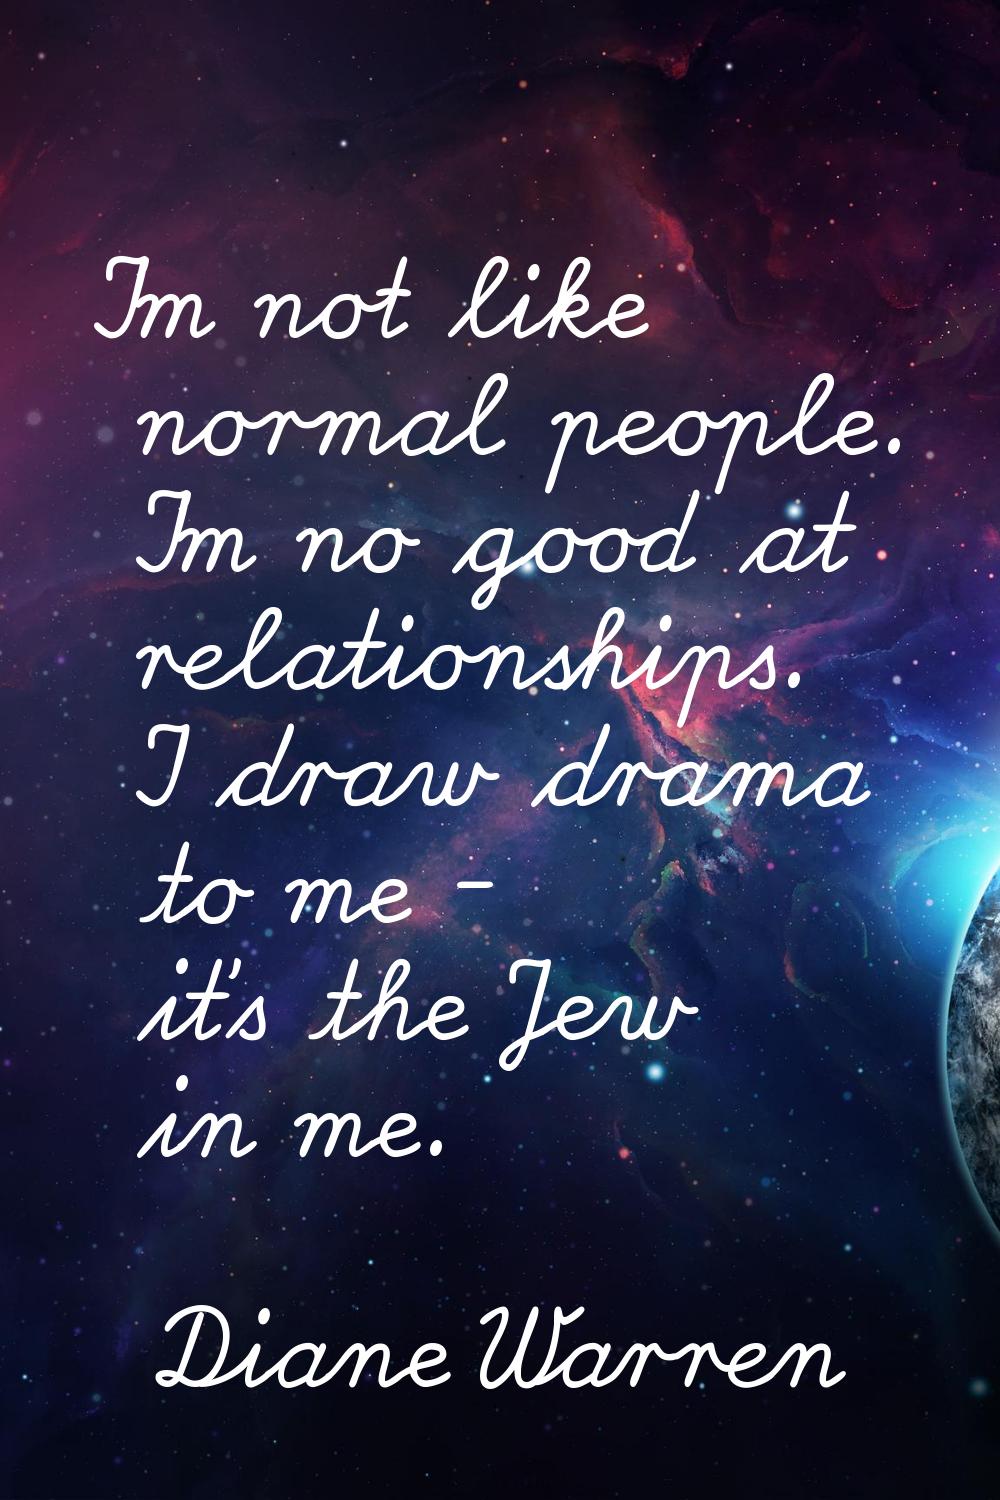 I'm not like normal people. I'm no good at relationships. I draw drama to me - it's the Jew in me.